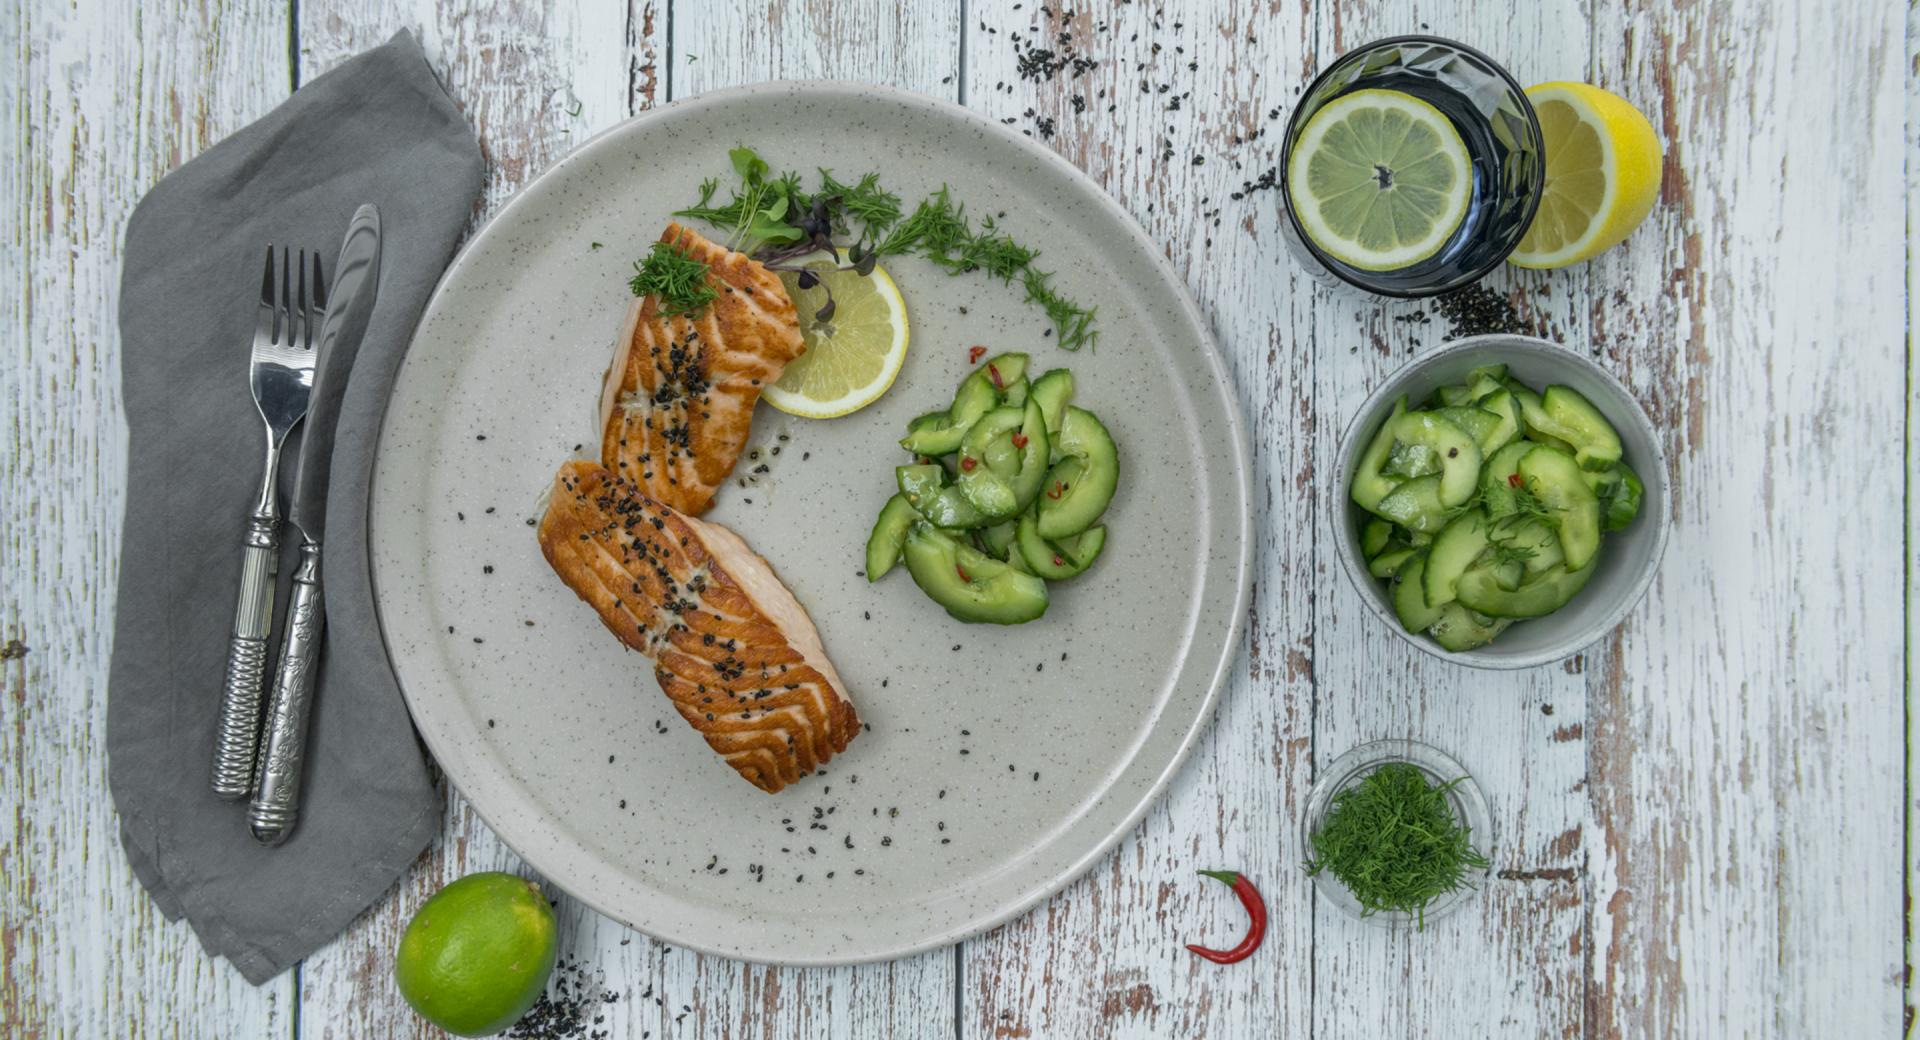 Salmon filet with chili and cucumber salad